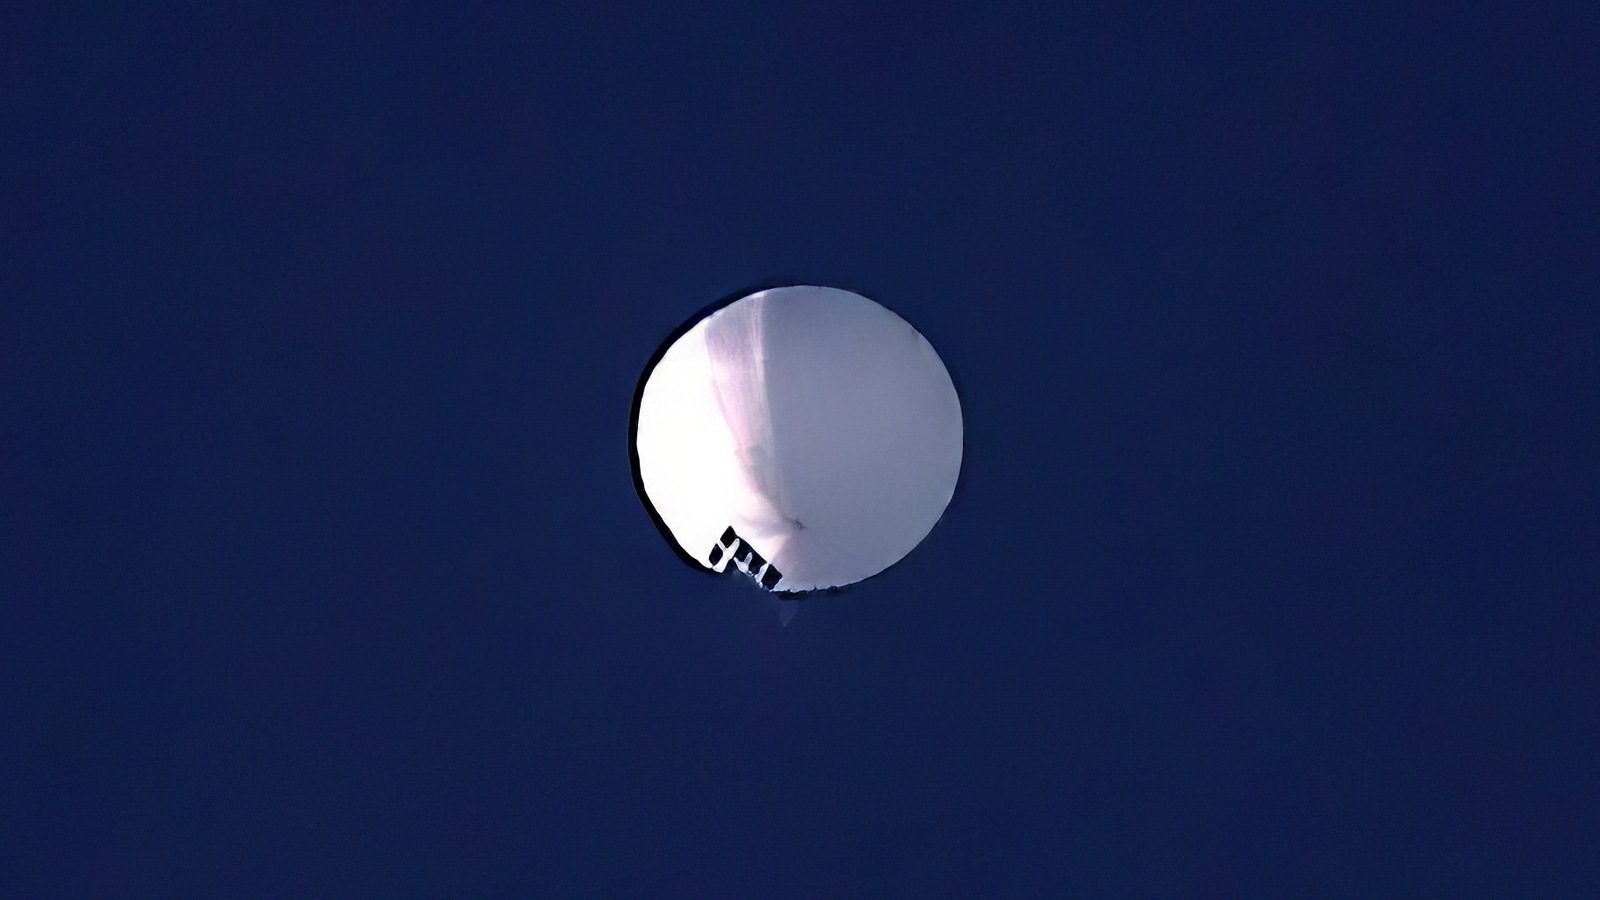 Canada monitoring potential 2nd incident of suspected surveillance balloon